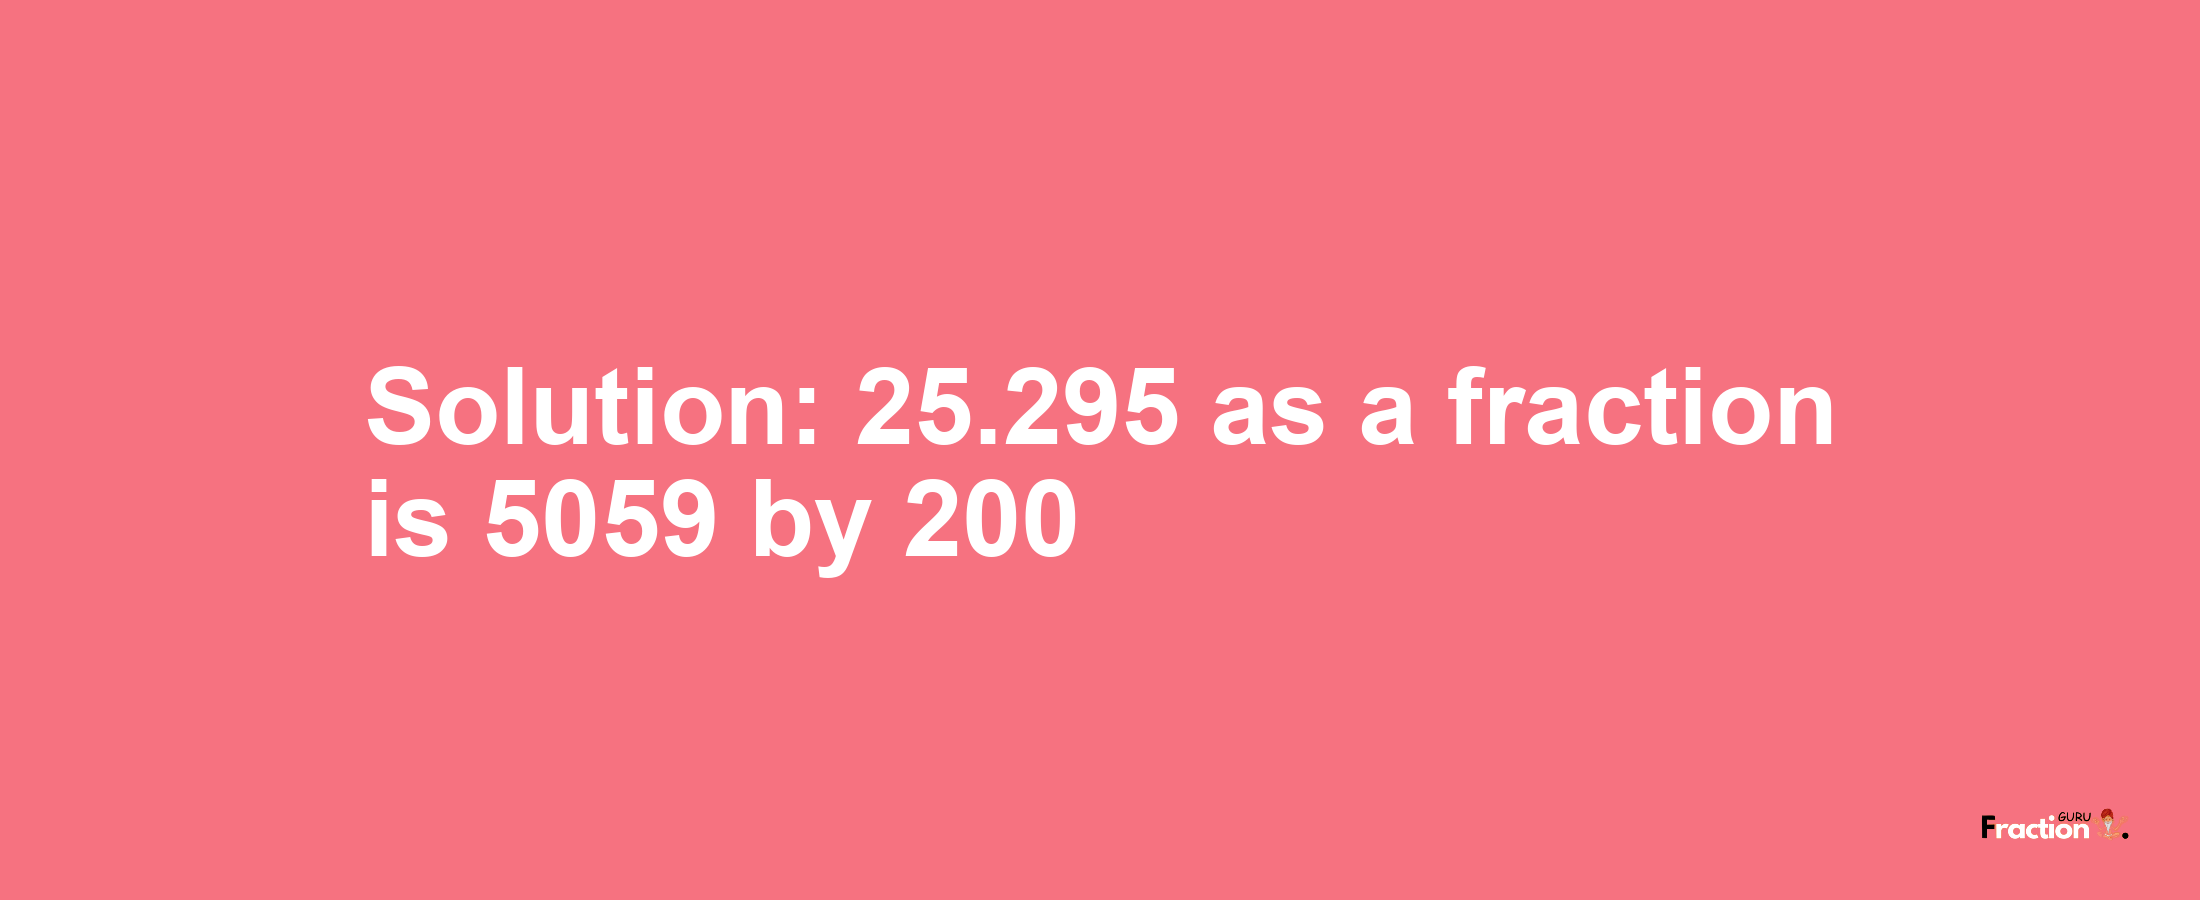 Solution:25.295 as a fraction is 5059/200